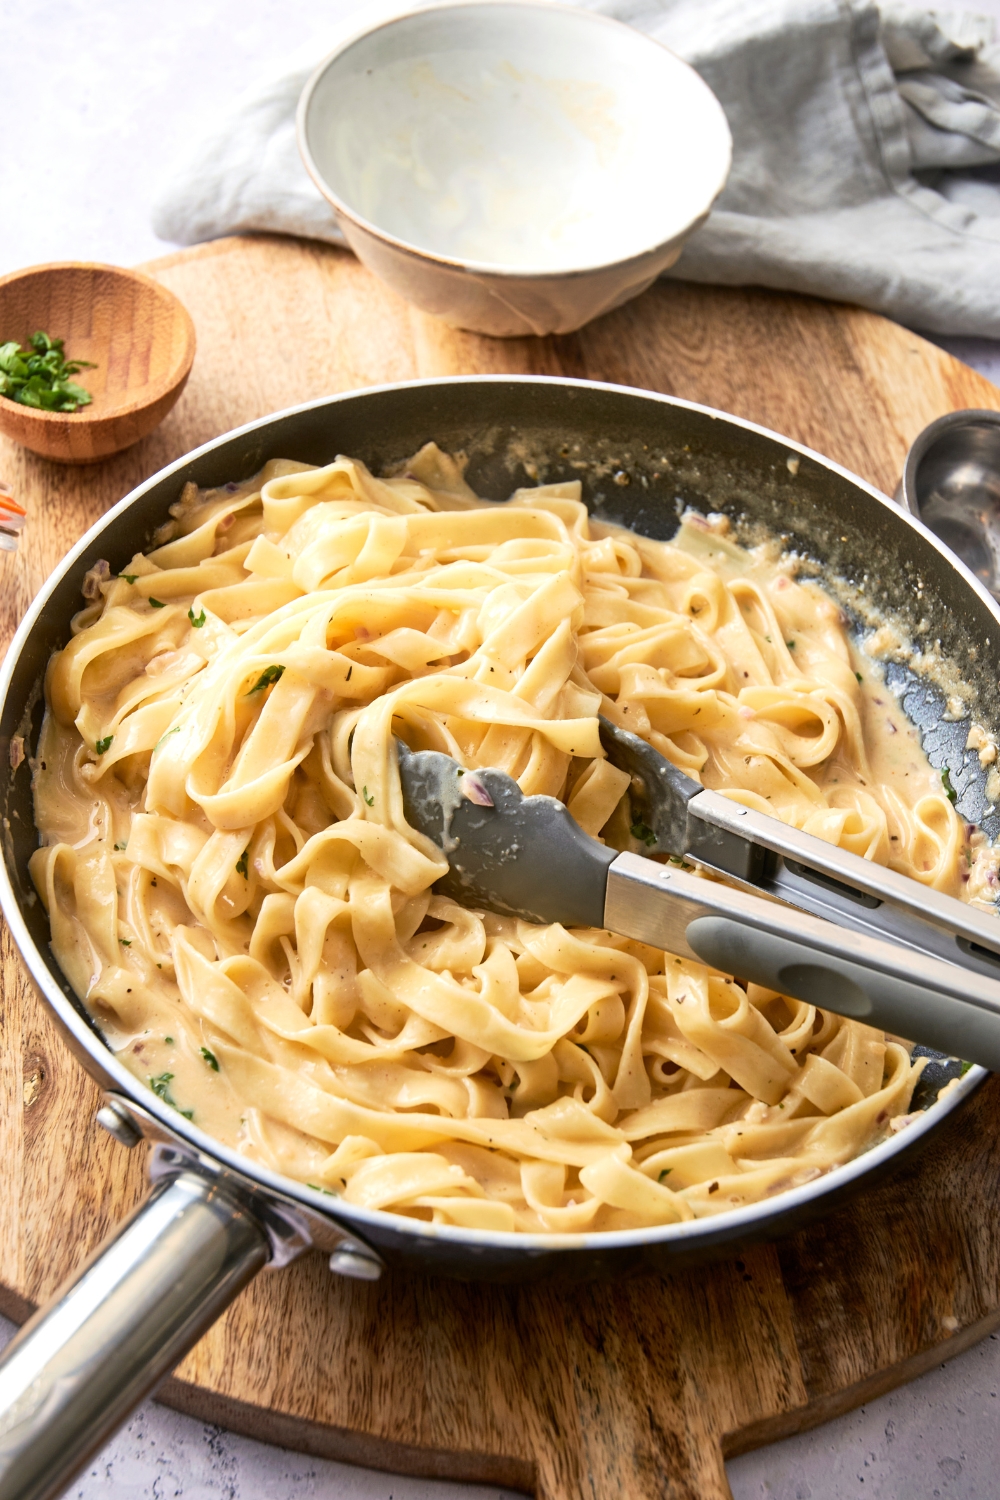 A pair of tongs rest in a pan full of fettuccine covered in Alfredo sauce.